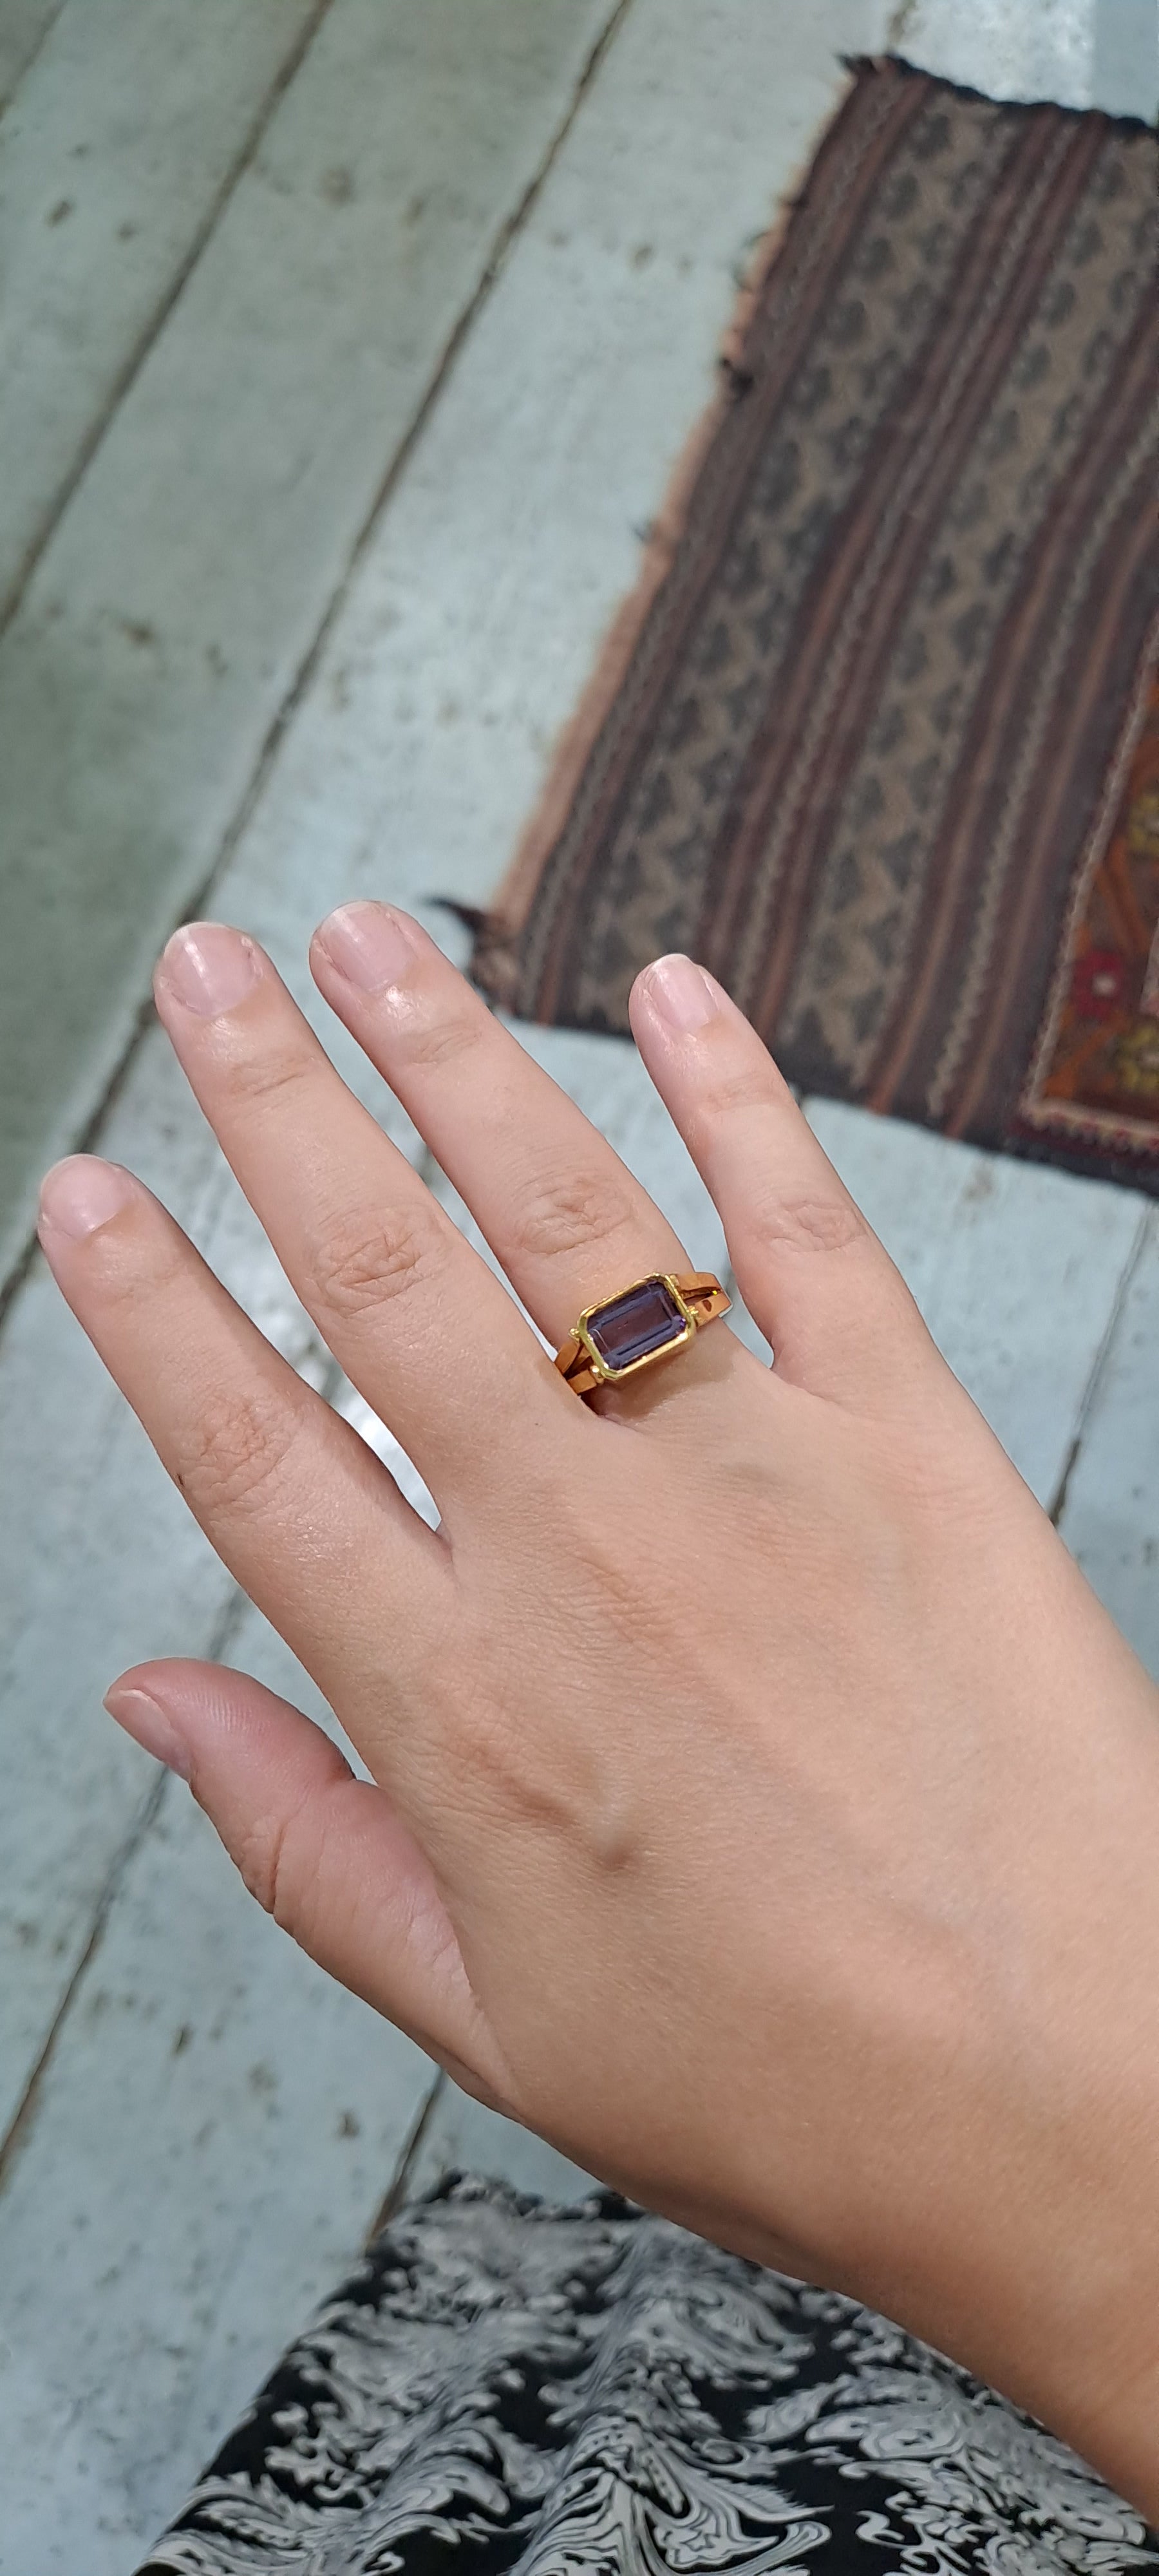 Ring in 18k Gold with Amethyst (B-46)